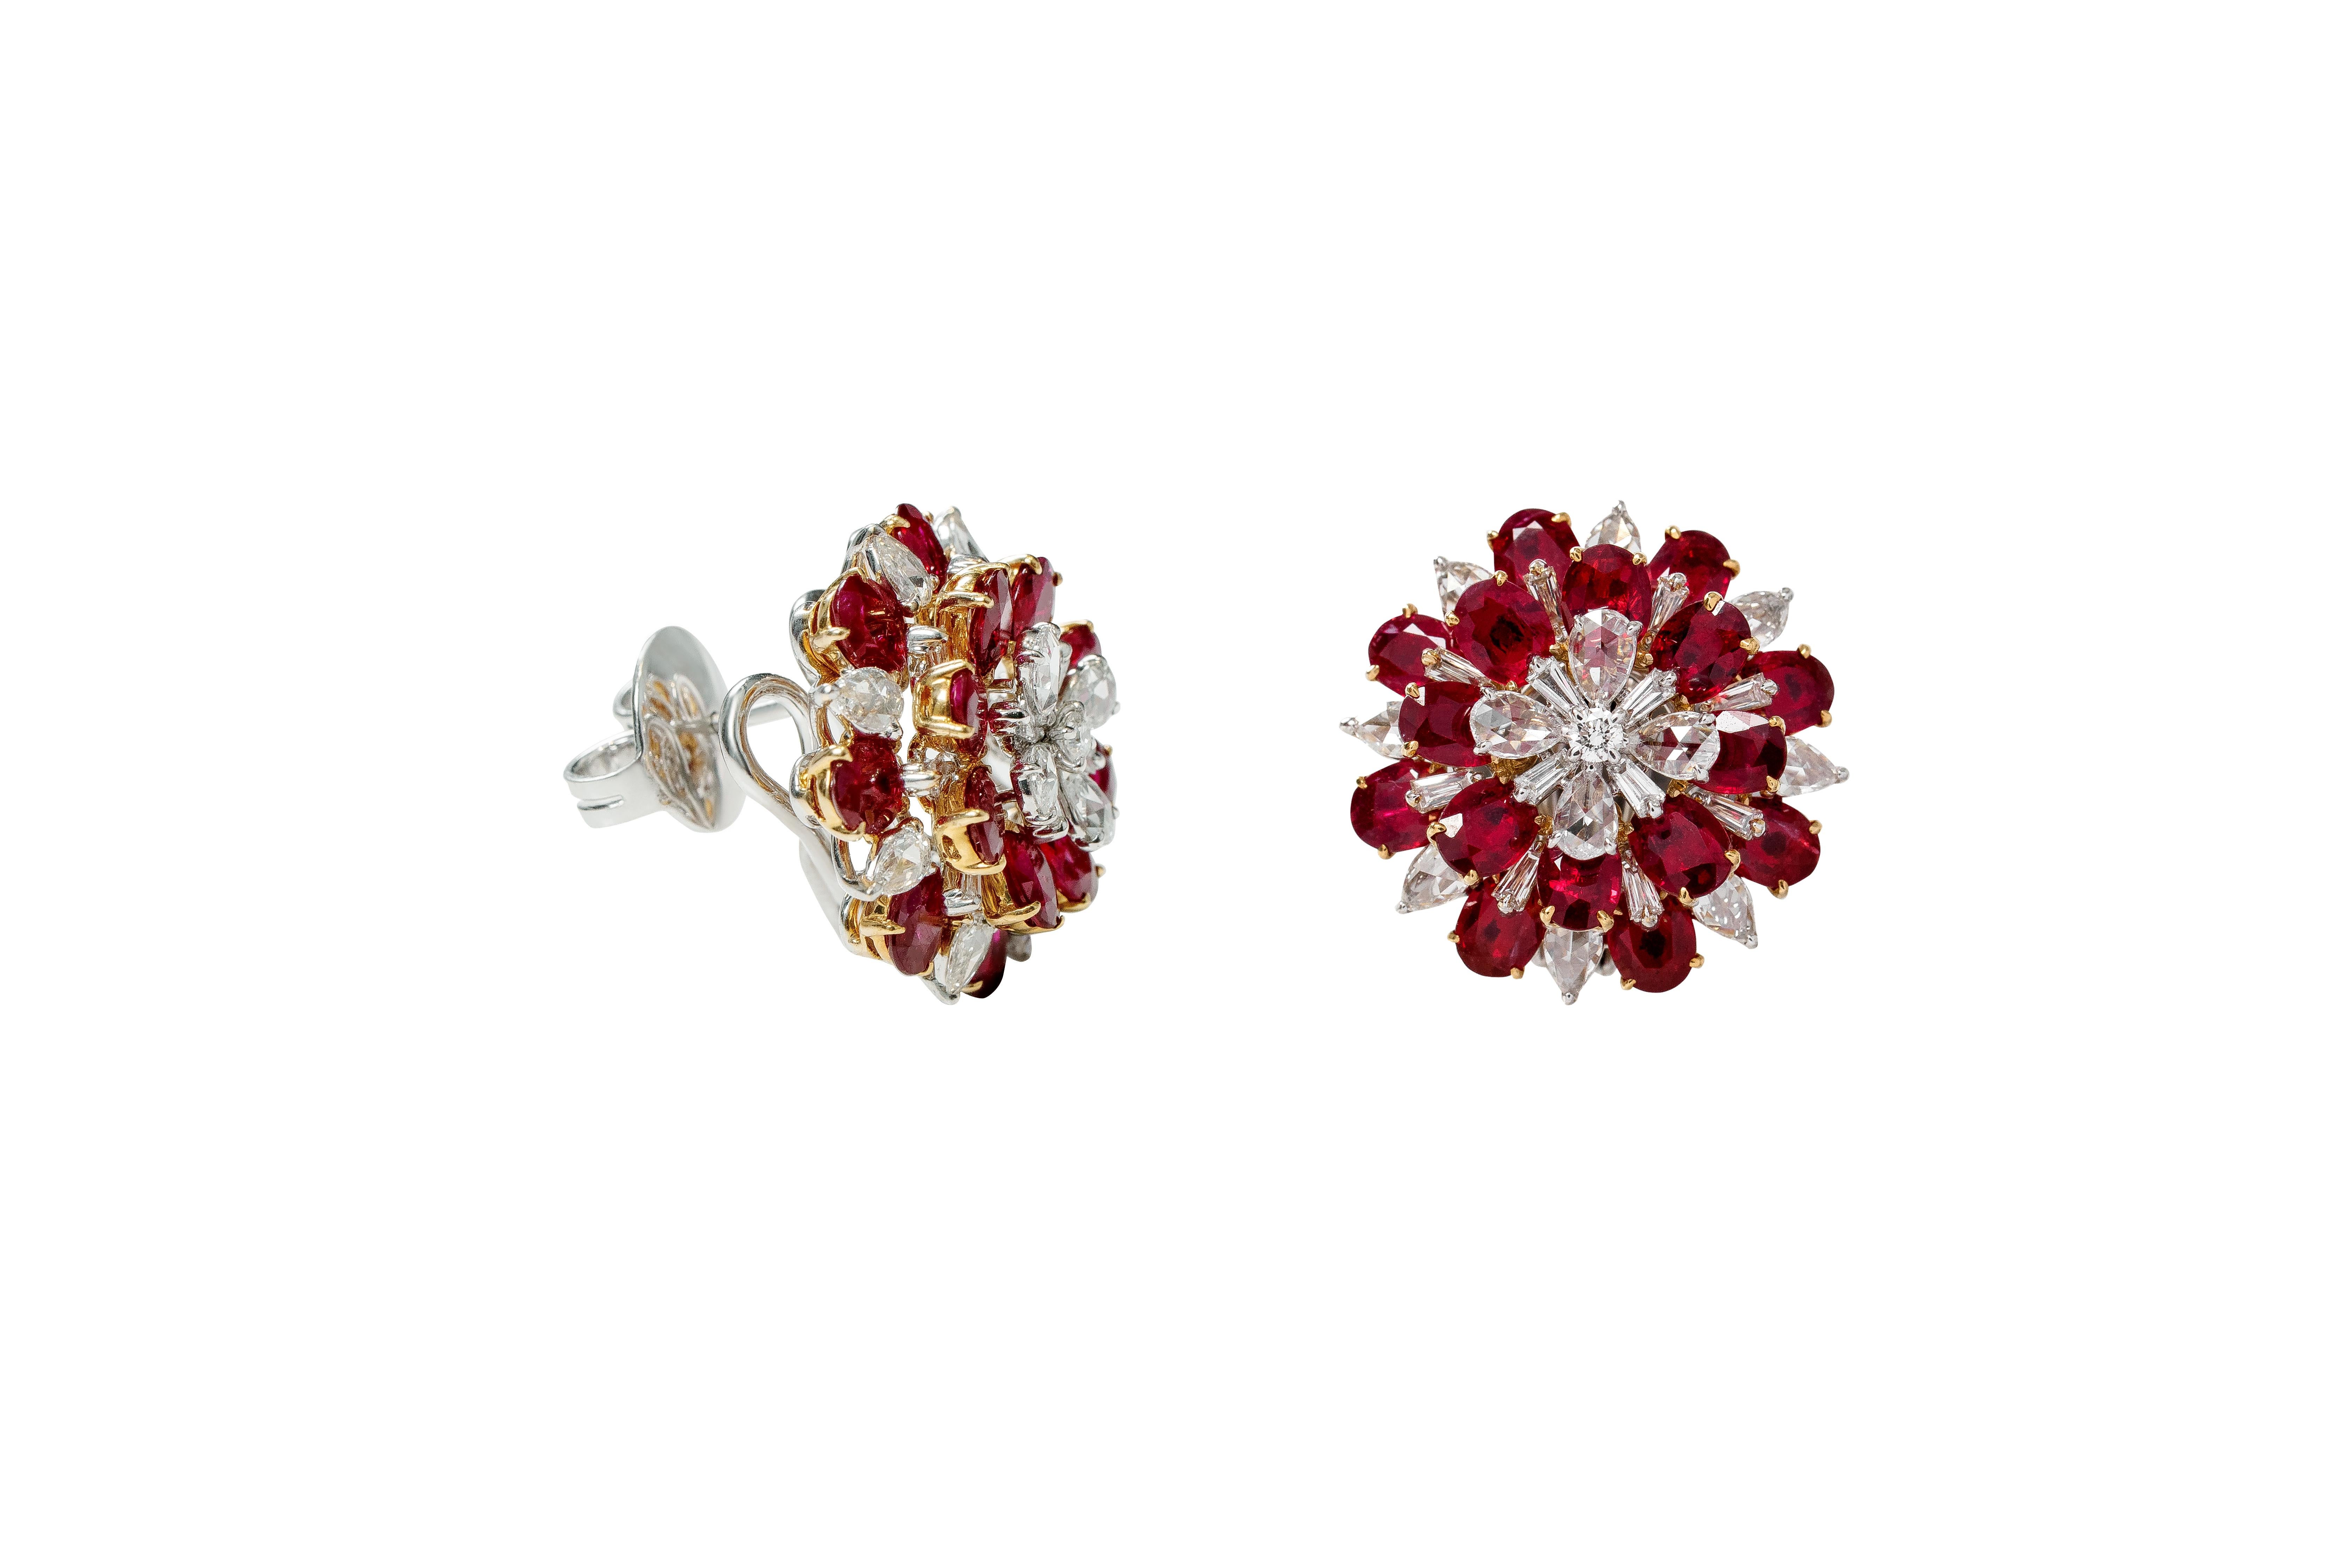 18 Karat White Gold 7.36 Carat Ruby and Diamond Flower Stud Earrings

This modulation 5-step flower petal lustrous fiery red matching ruby and fancy pear rose cut and tapered baguette full cut diamond earring makes a true statement as an immaculate